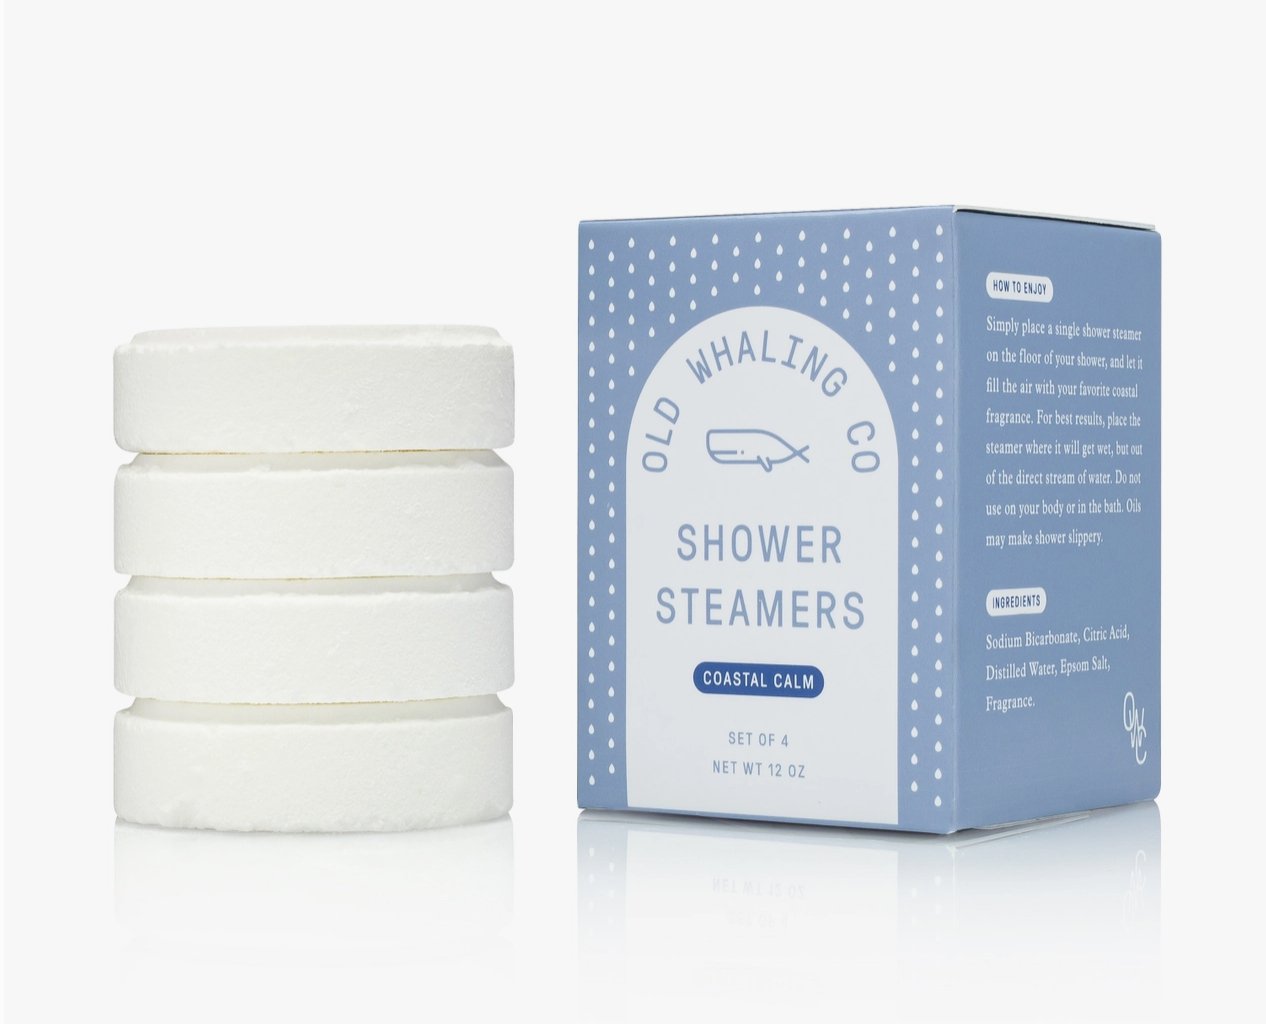 Old Whaling Company Shower Steamers: Coastal Calm - Essentially Charleston